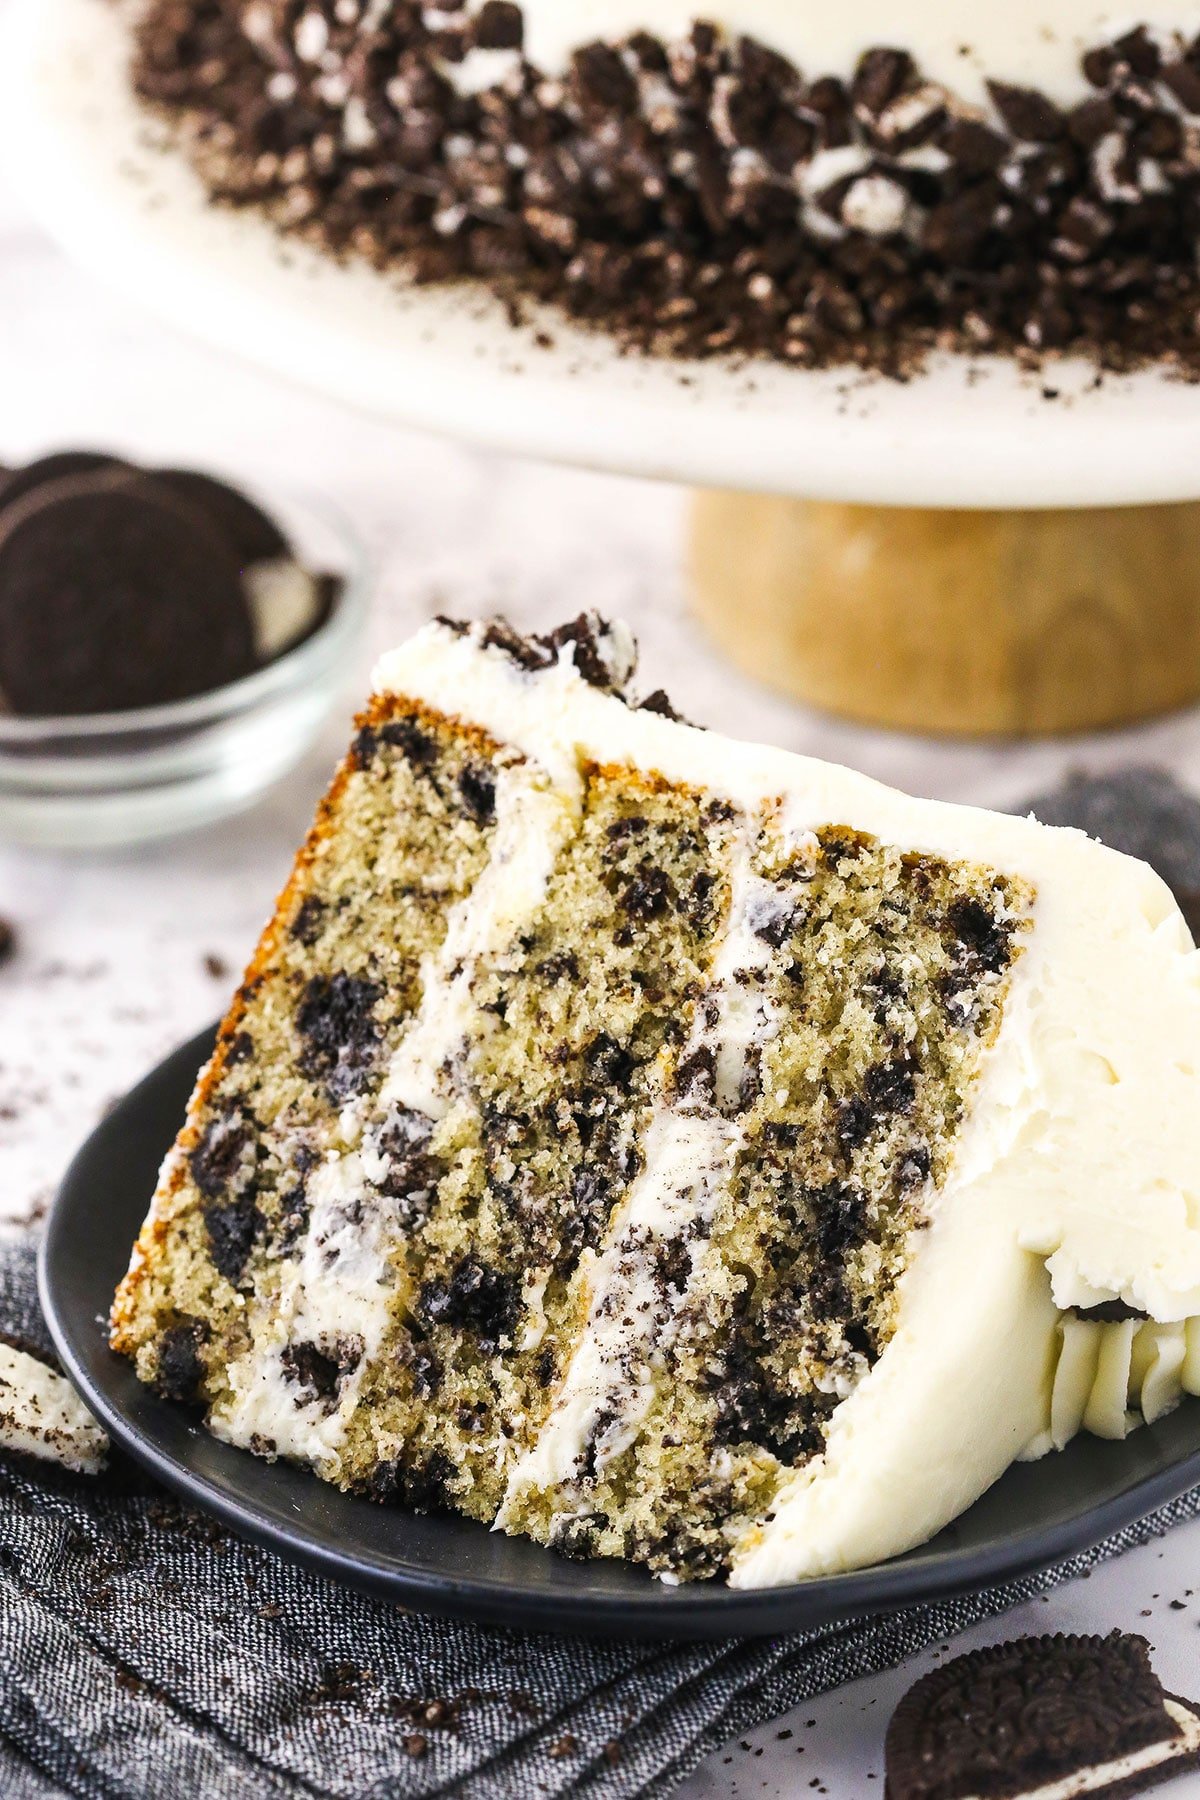 A piece of Oreo layer cake on a dessert plate with Oreo cookies and more cake in the background